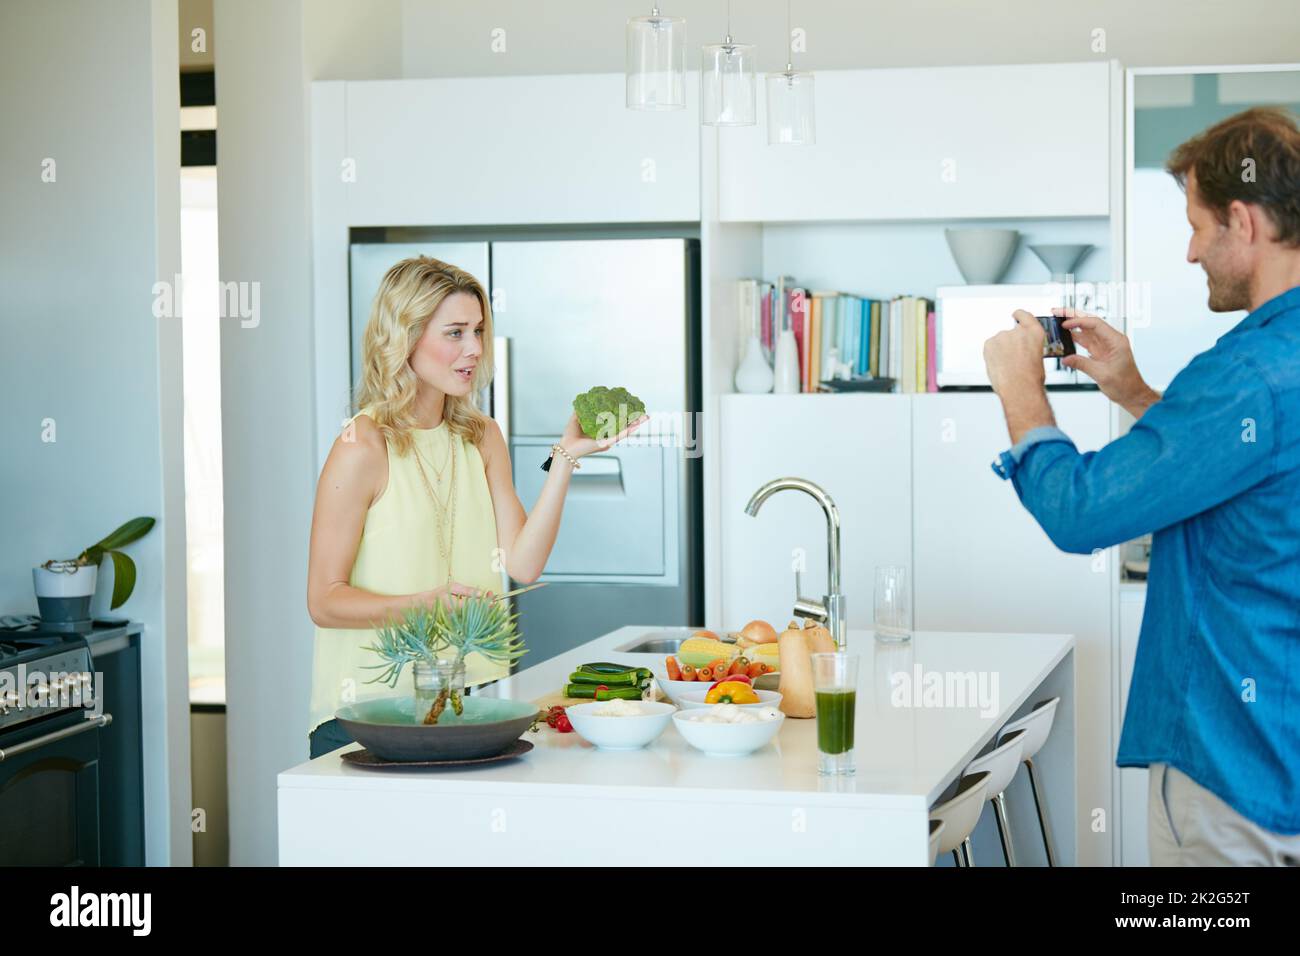 The star of the show is broccoli. Shot of a husband taking snapshots of his wife preparing a healthy meal at home. Stock Photo